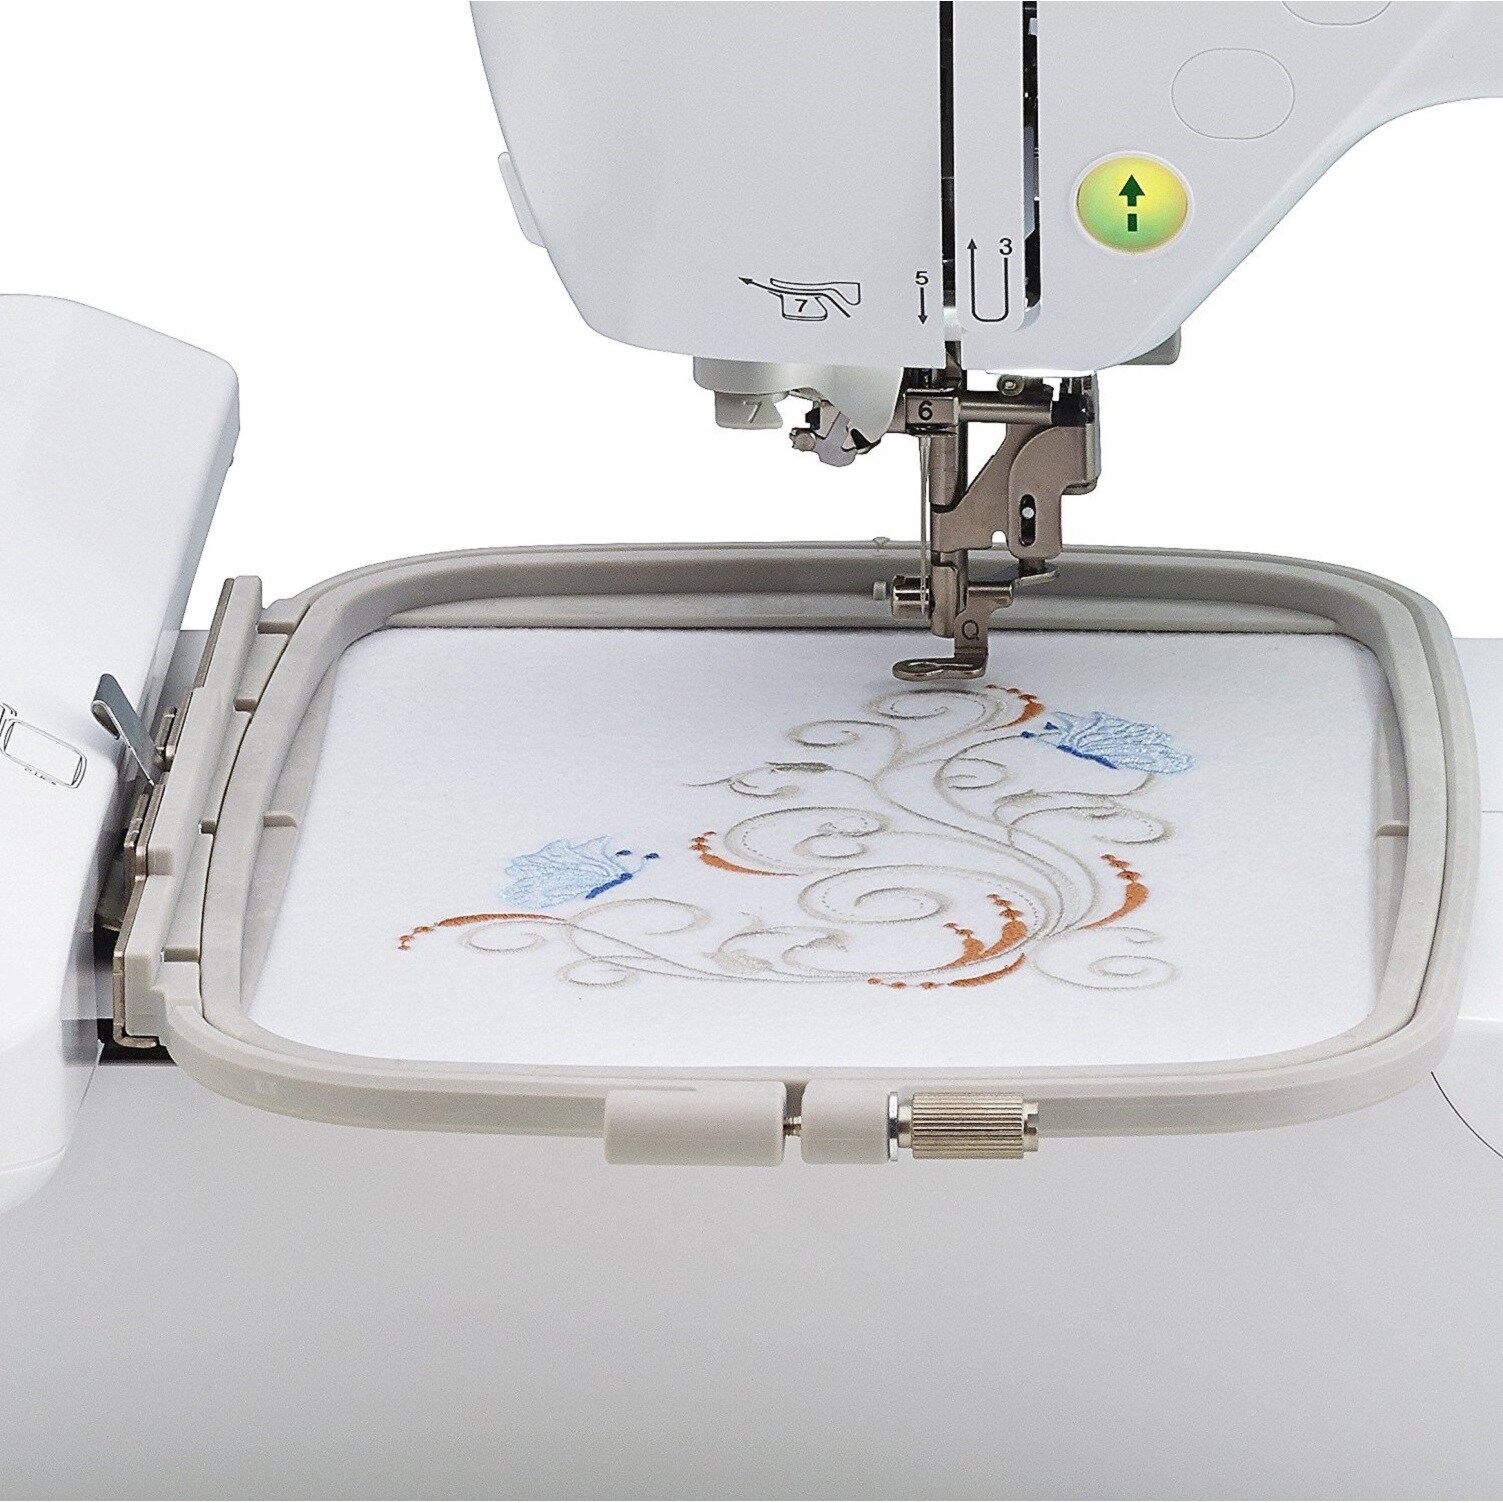 Brother PE800 5 x 7 Embroidery Machine w/ Full Color LCD Screen + 11  Built-In Lettering Fonts + 138 Built-In Designs - Bed Bath & Beyond -  22322667